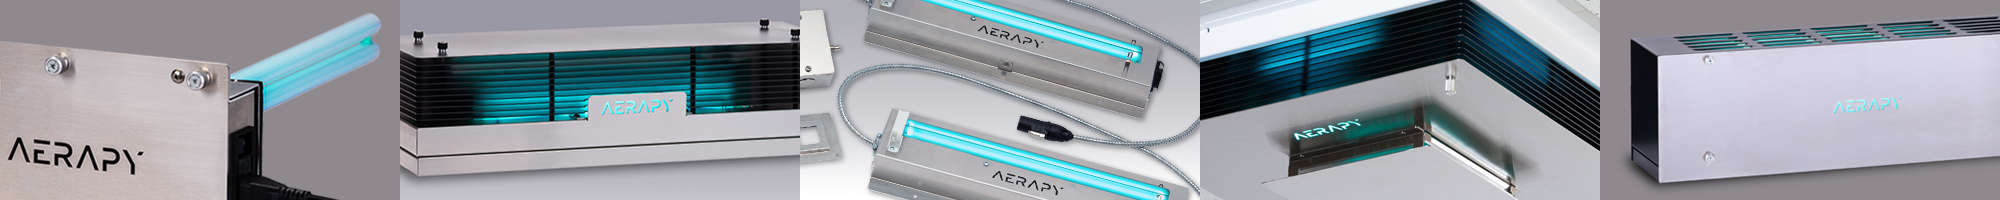 Aerapy's family of UV light products